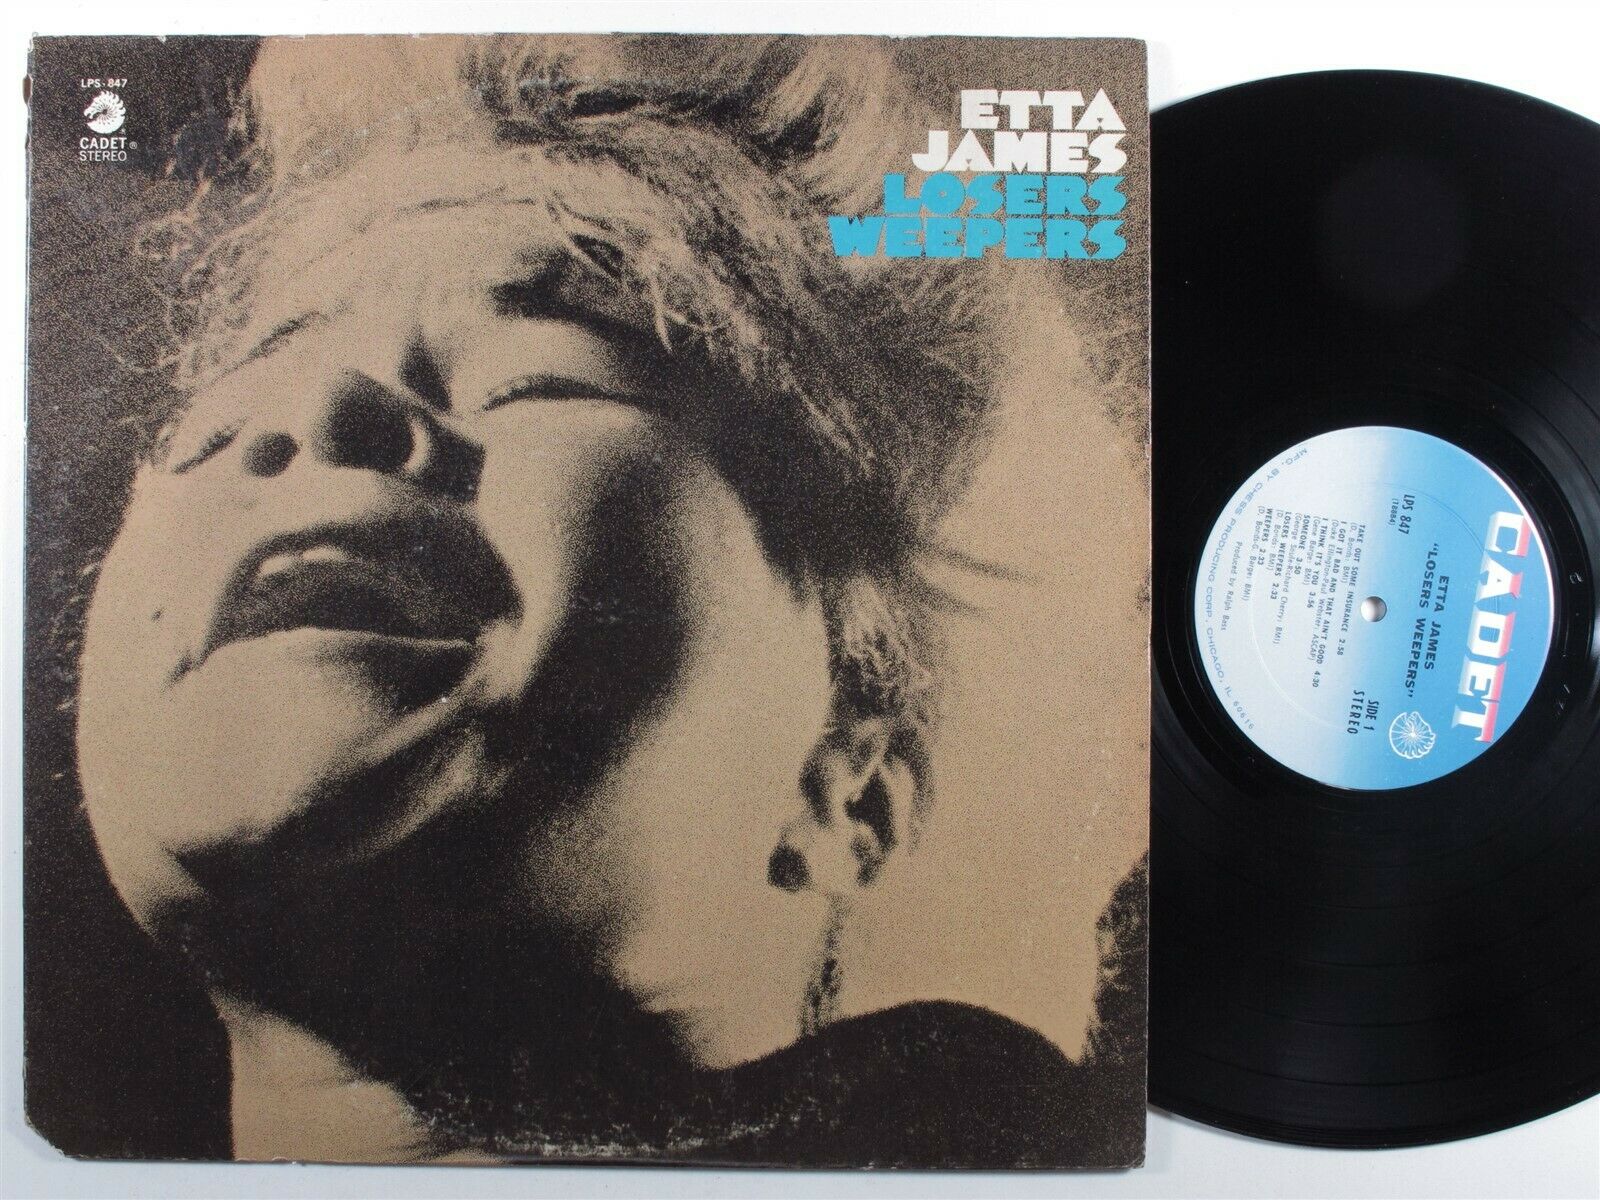 ETTA JAMES Losers Weepers CADET LP VG+ a